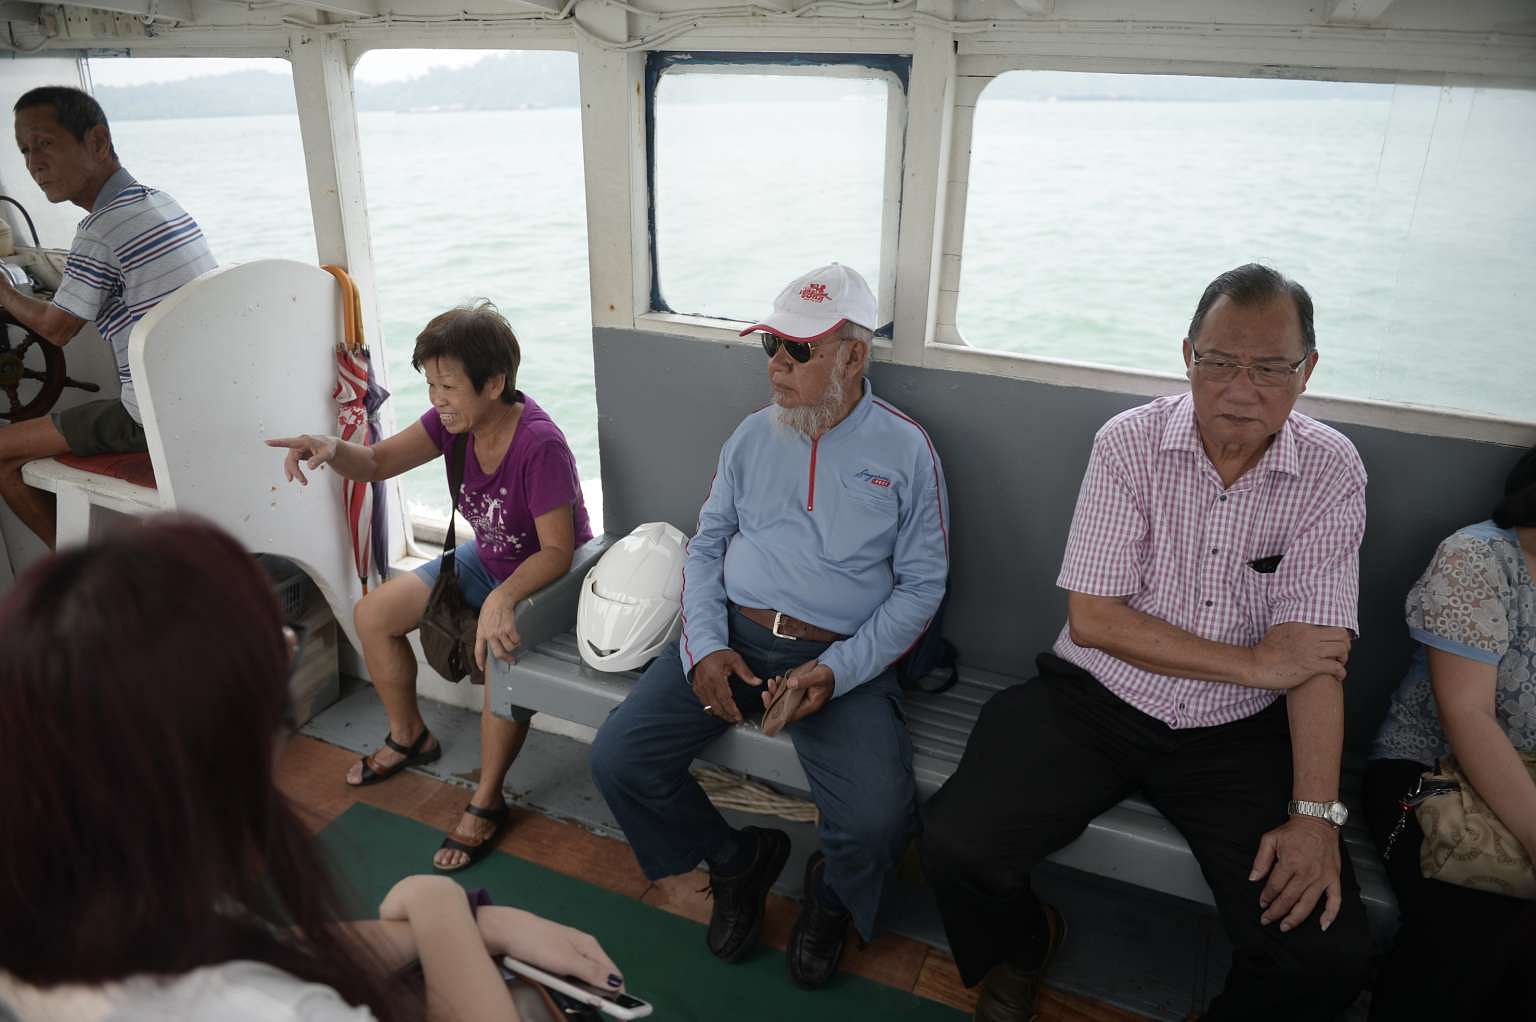 Mr Haron Jomahat (centre) takes a boat five days a week to Pulau Ubin, where he delivers mail to about 50 buildings.